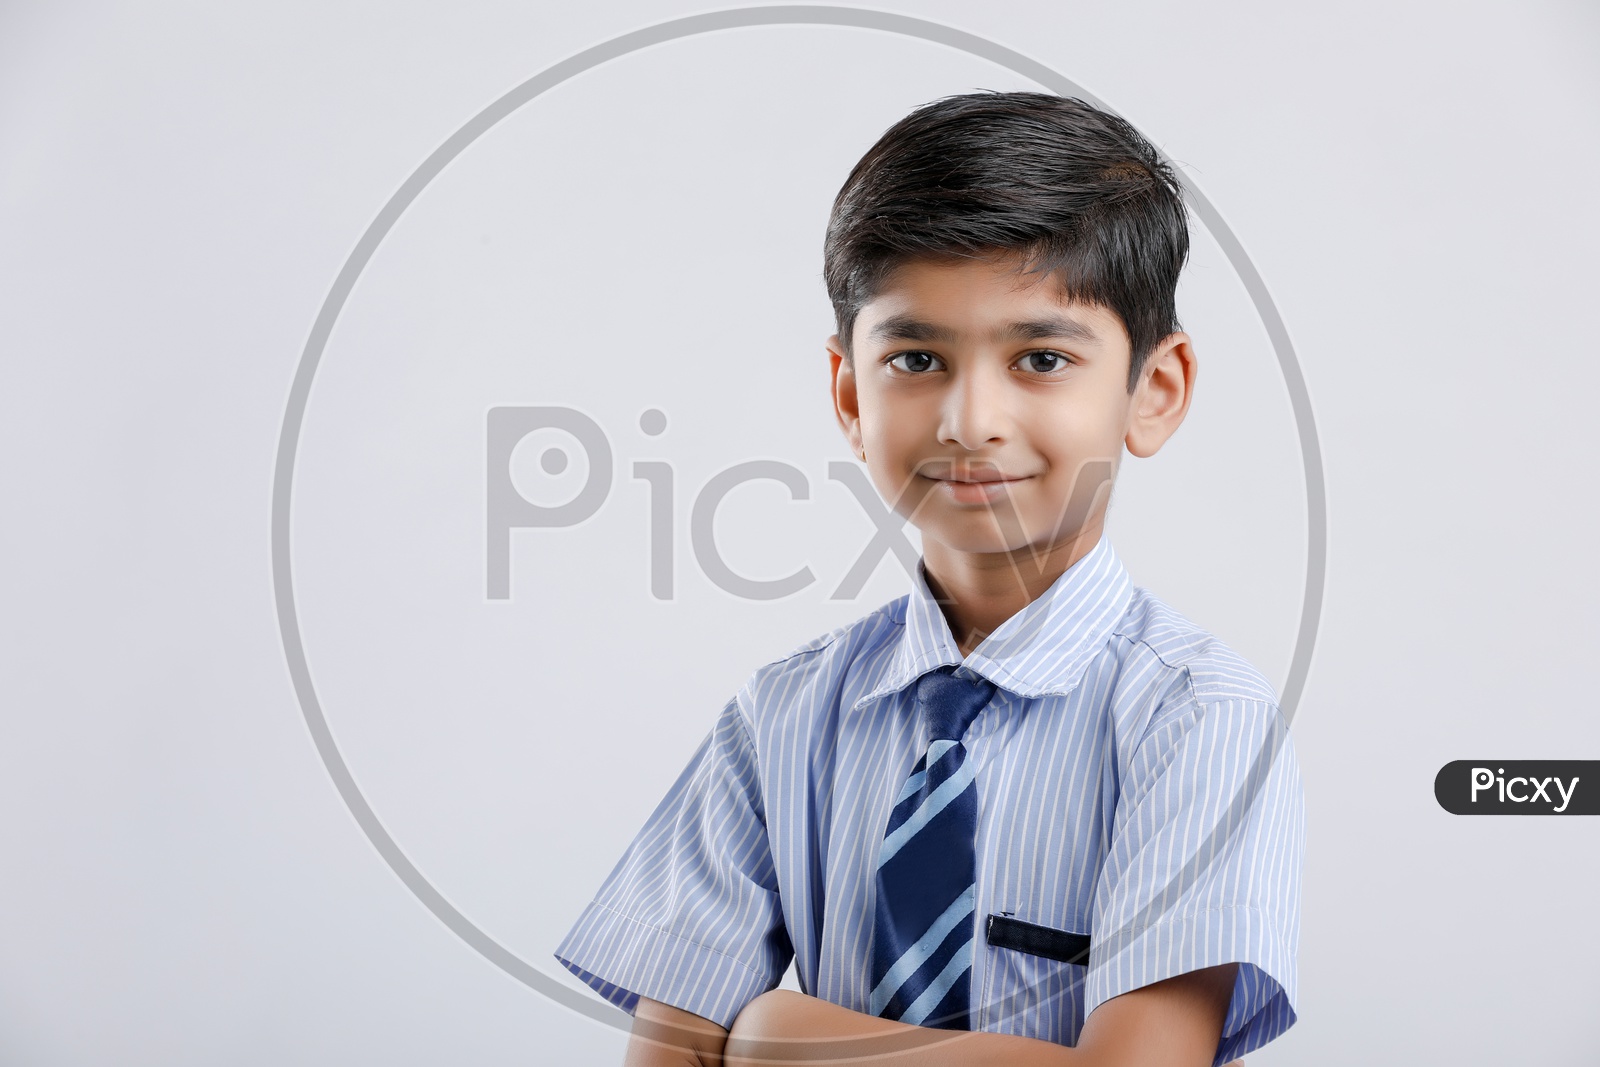 Cute Indian or Asian Kid Or Boy In School Uniform And Posing Over an Isolated White Background